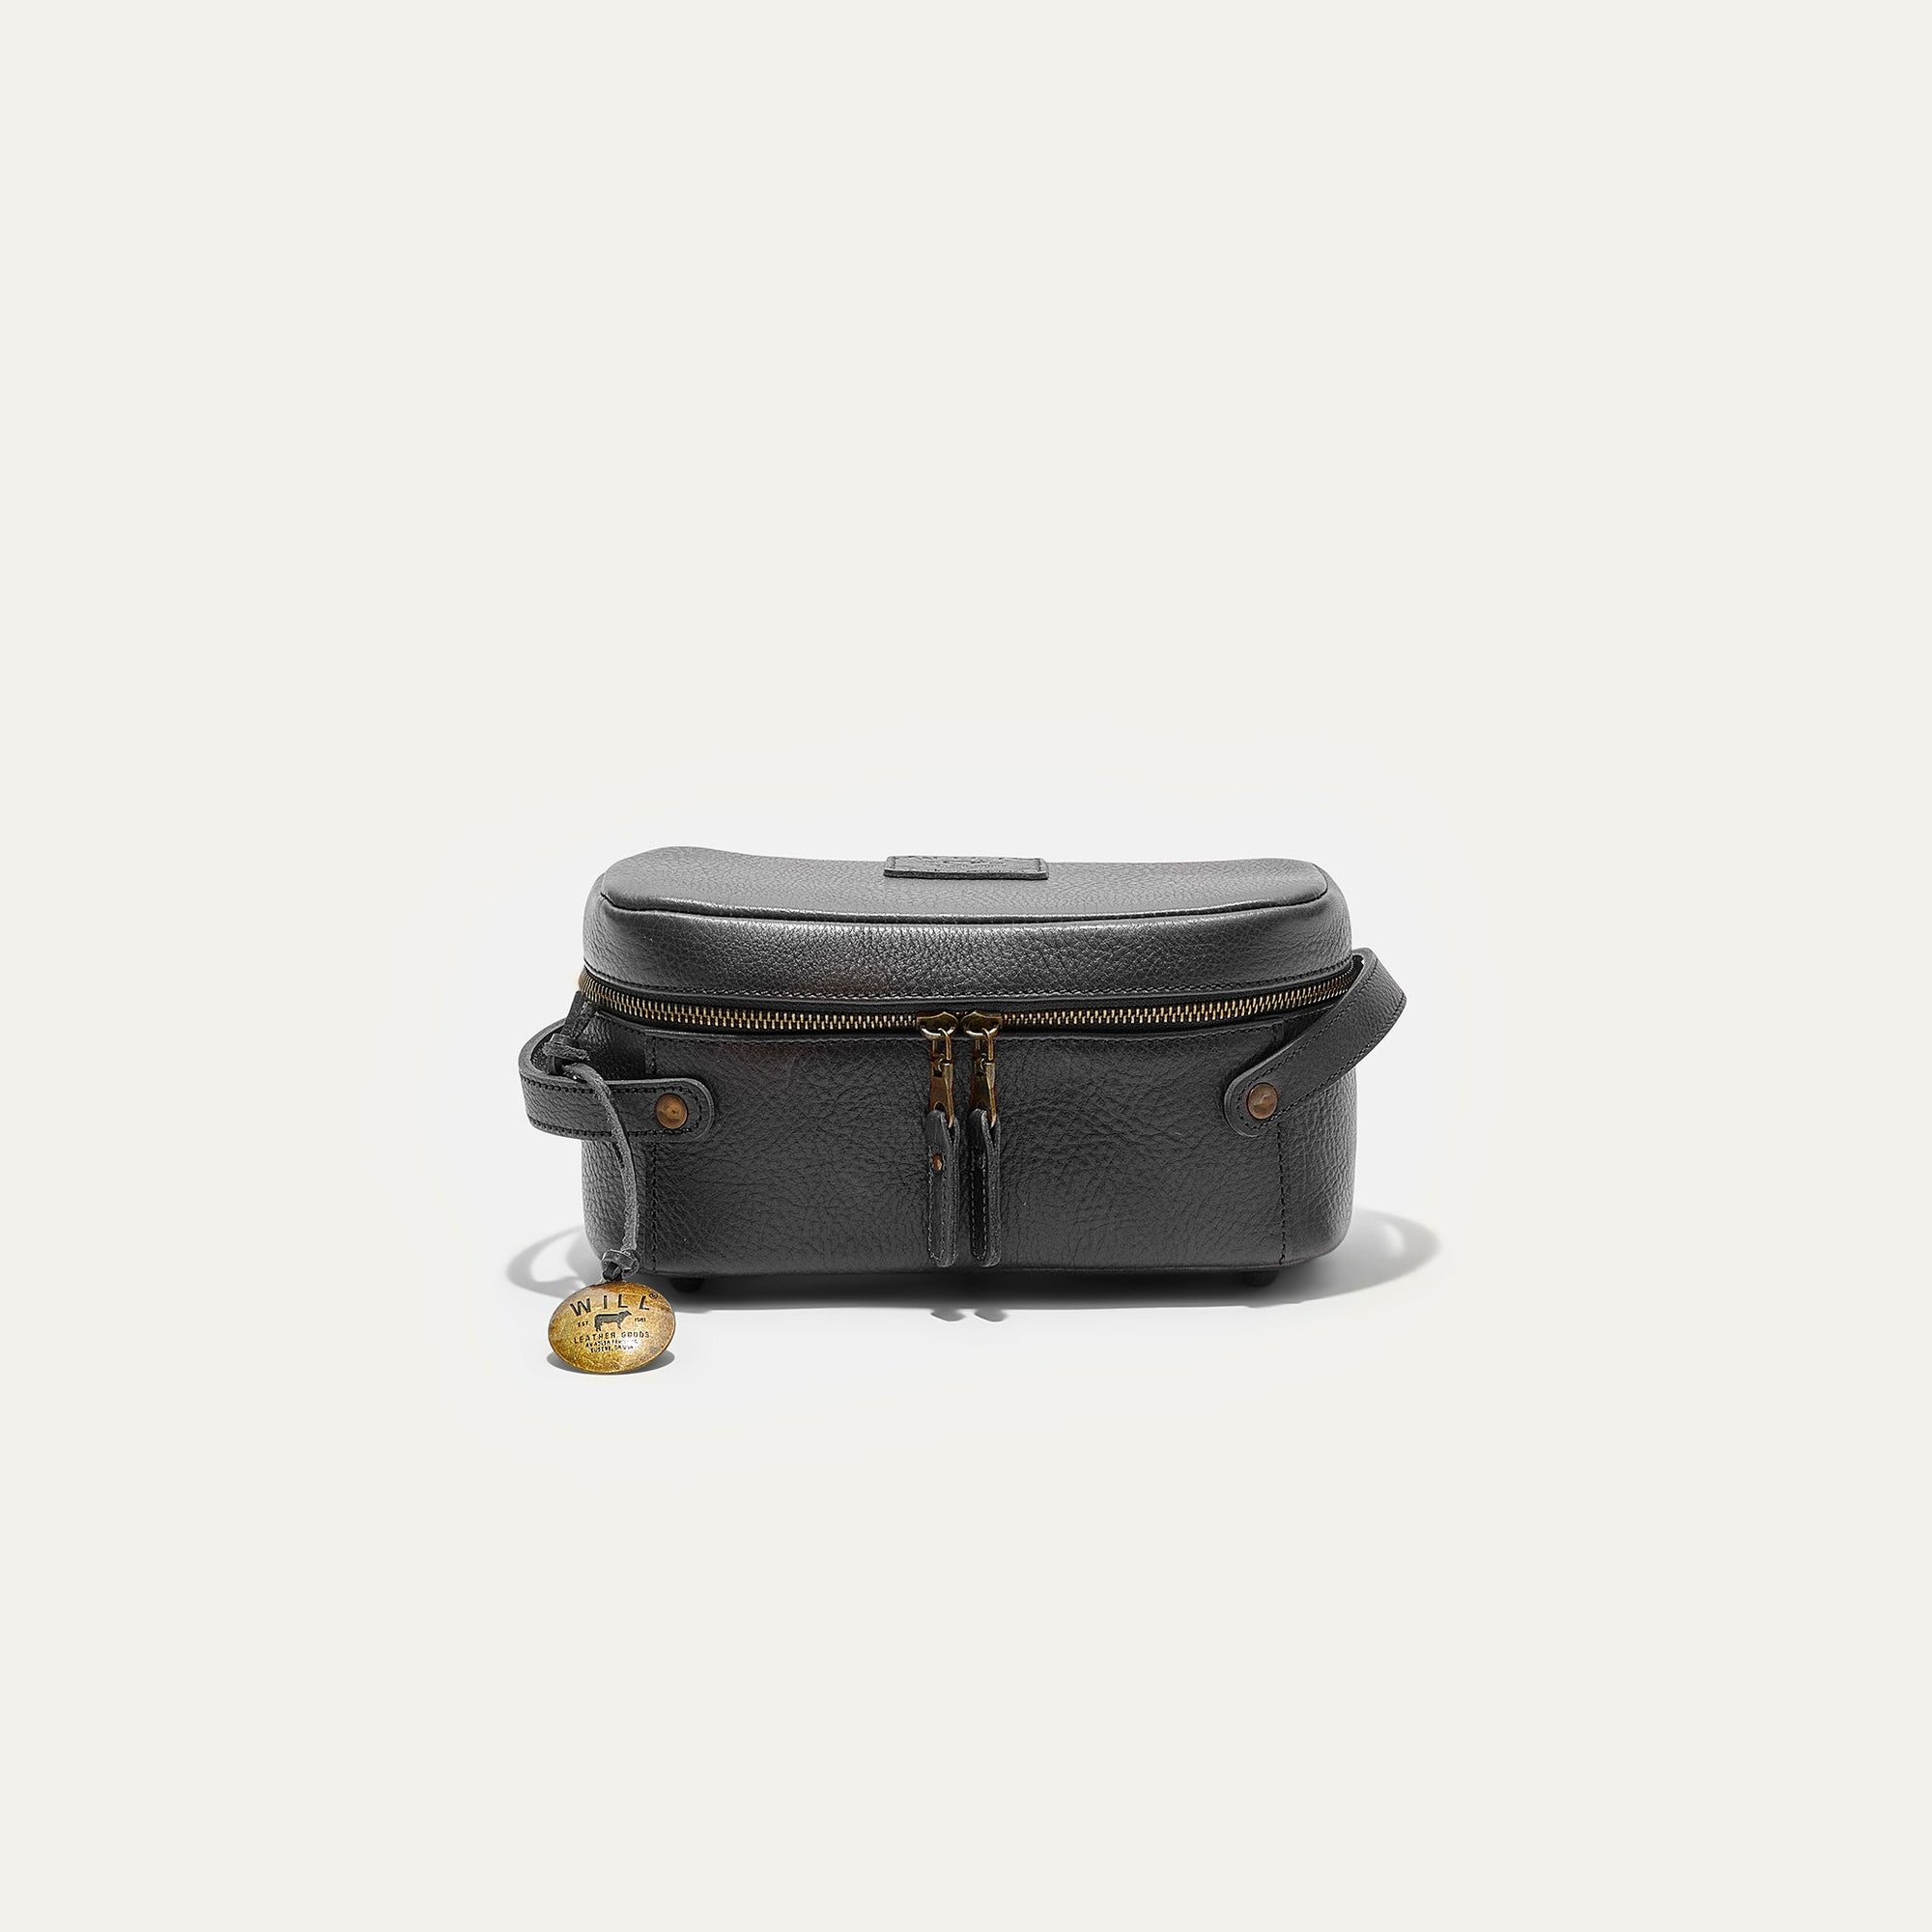 Desmond Leather Travel Kit in Black by Will Leather Goods